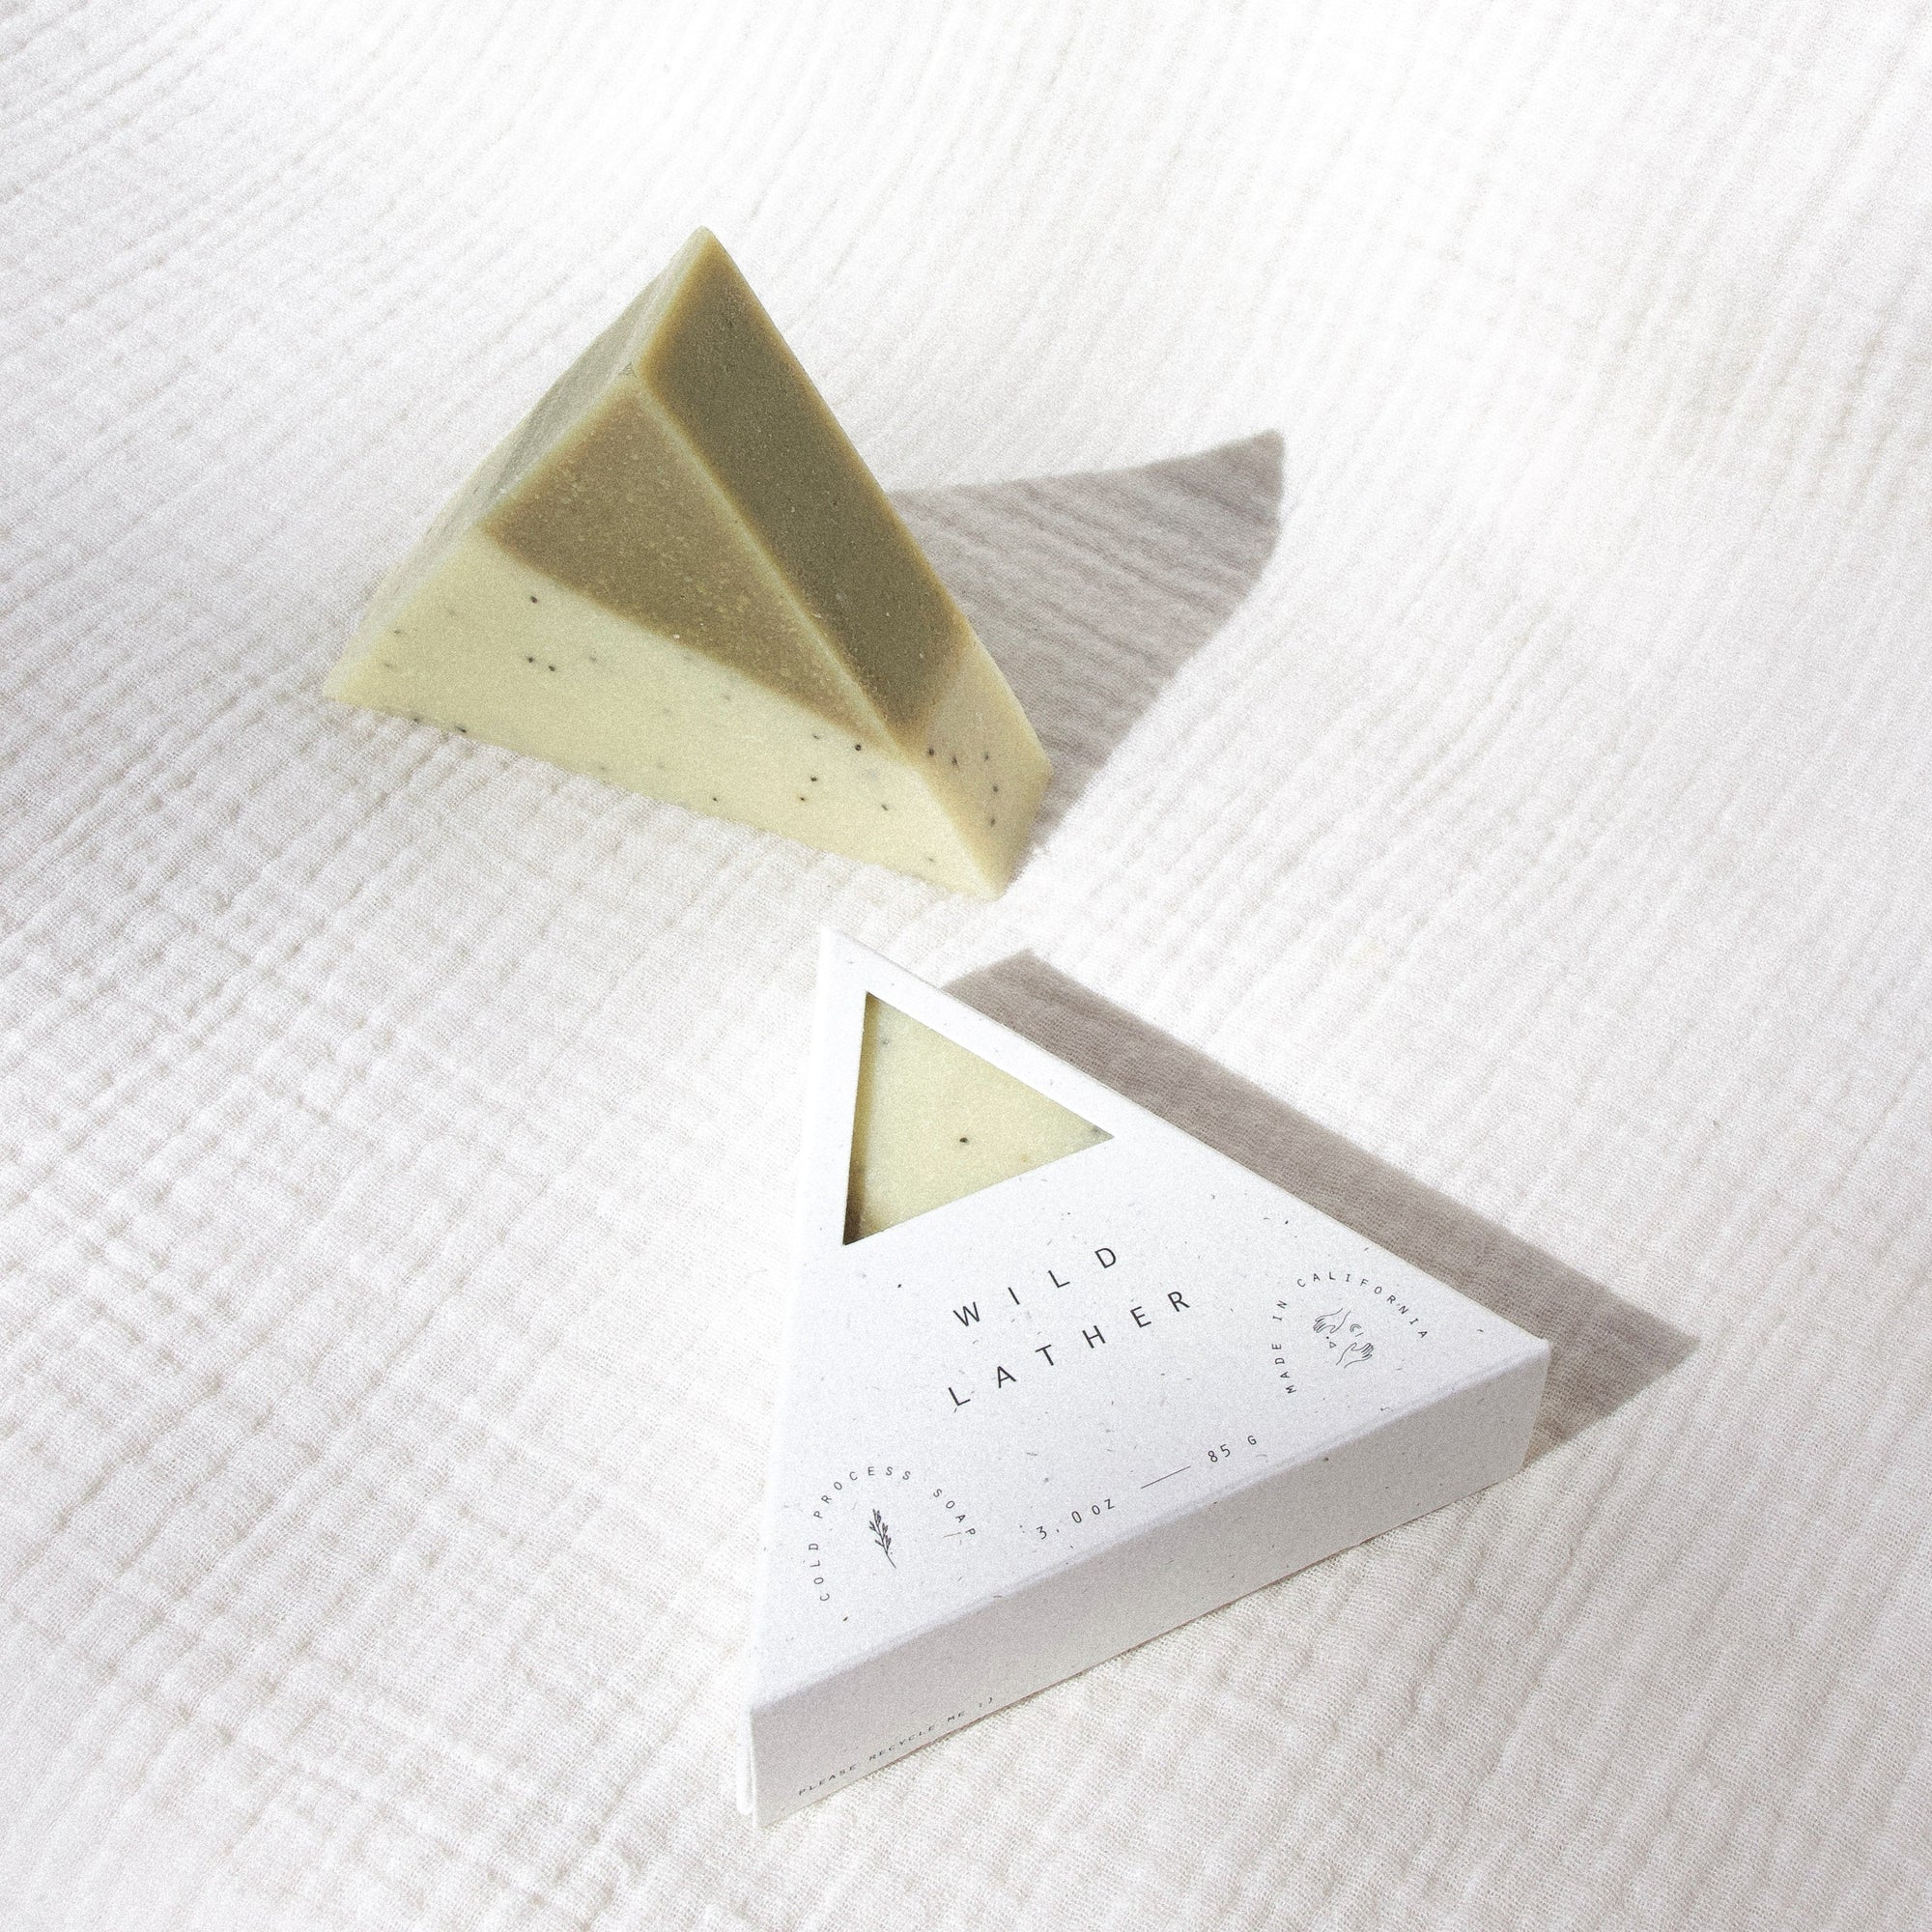 Two triangle soaps against white textured cloth